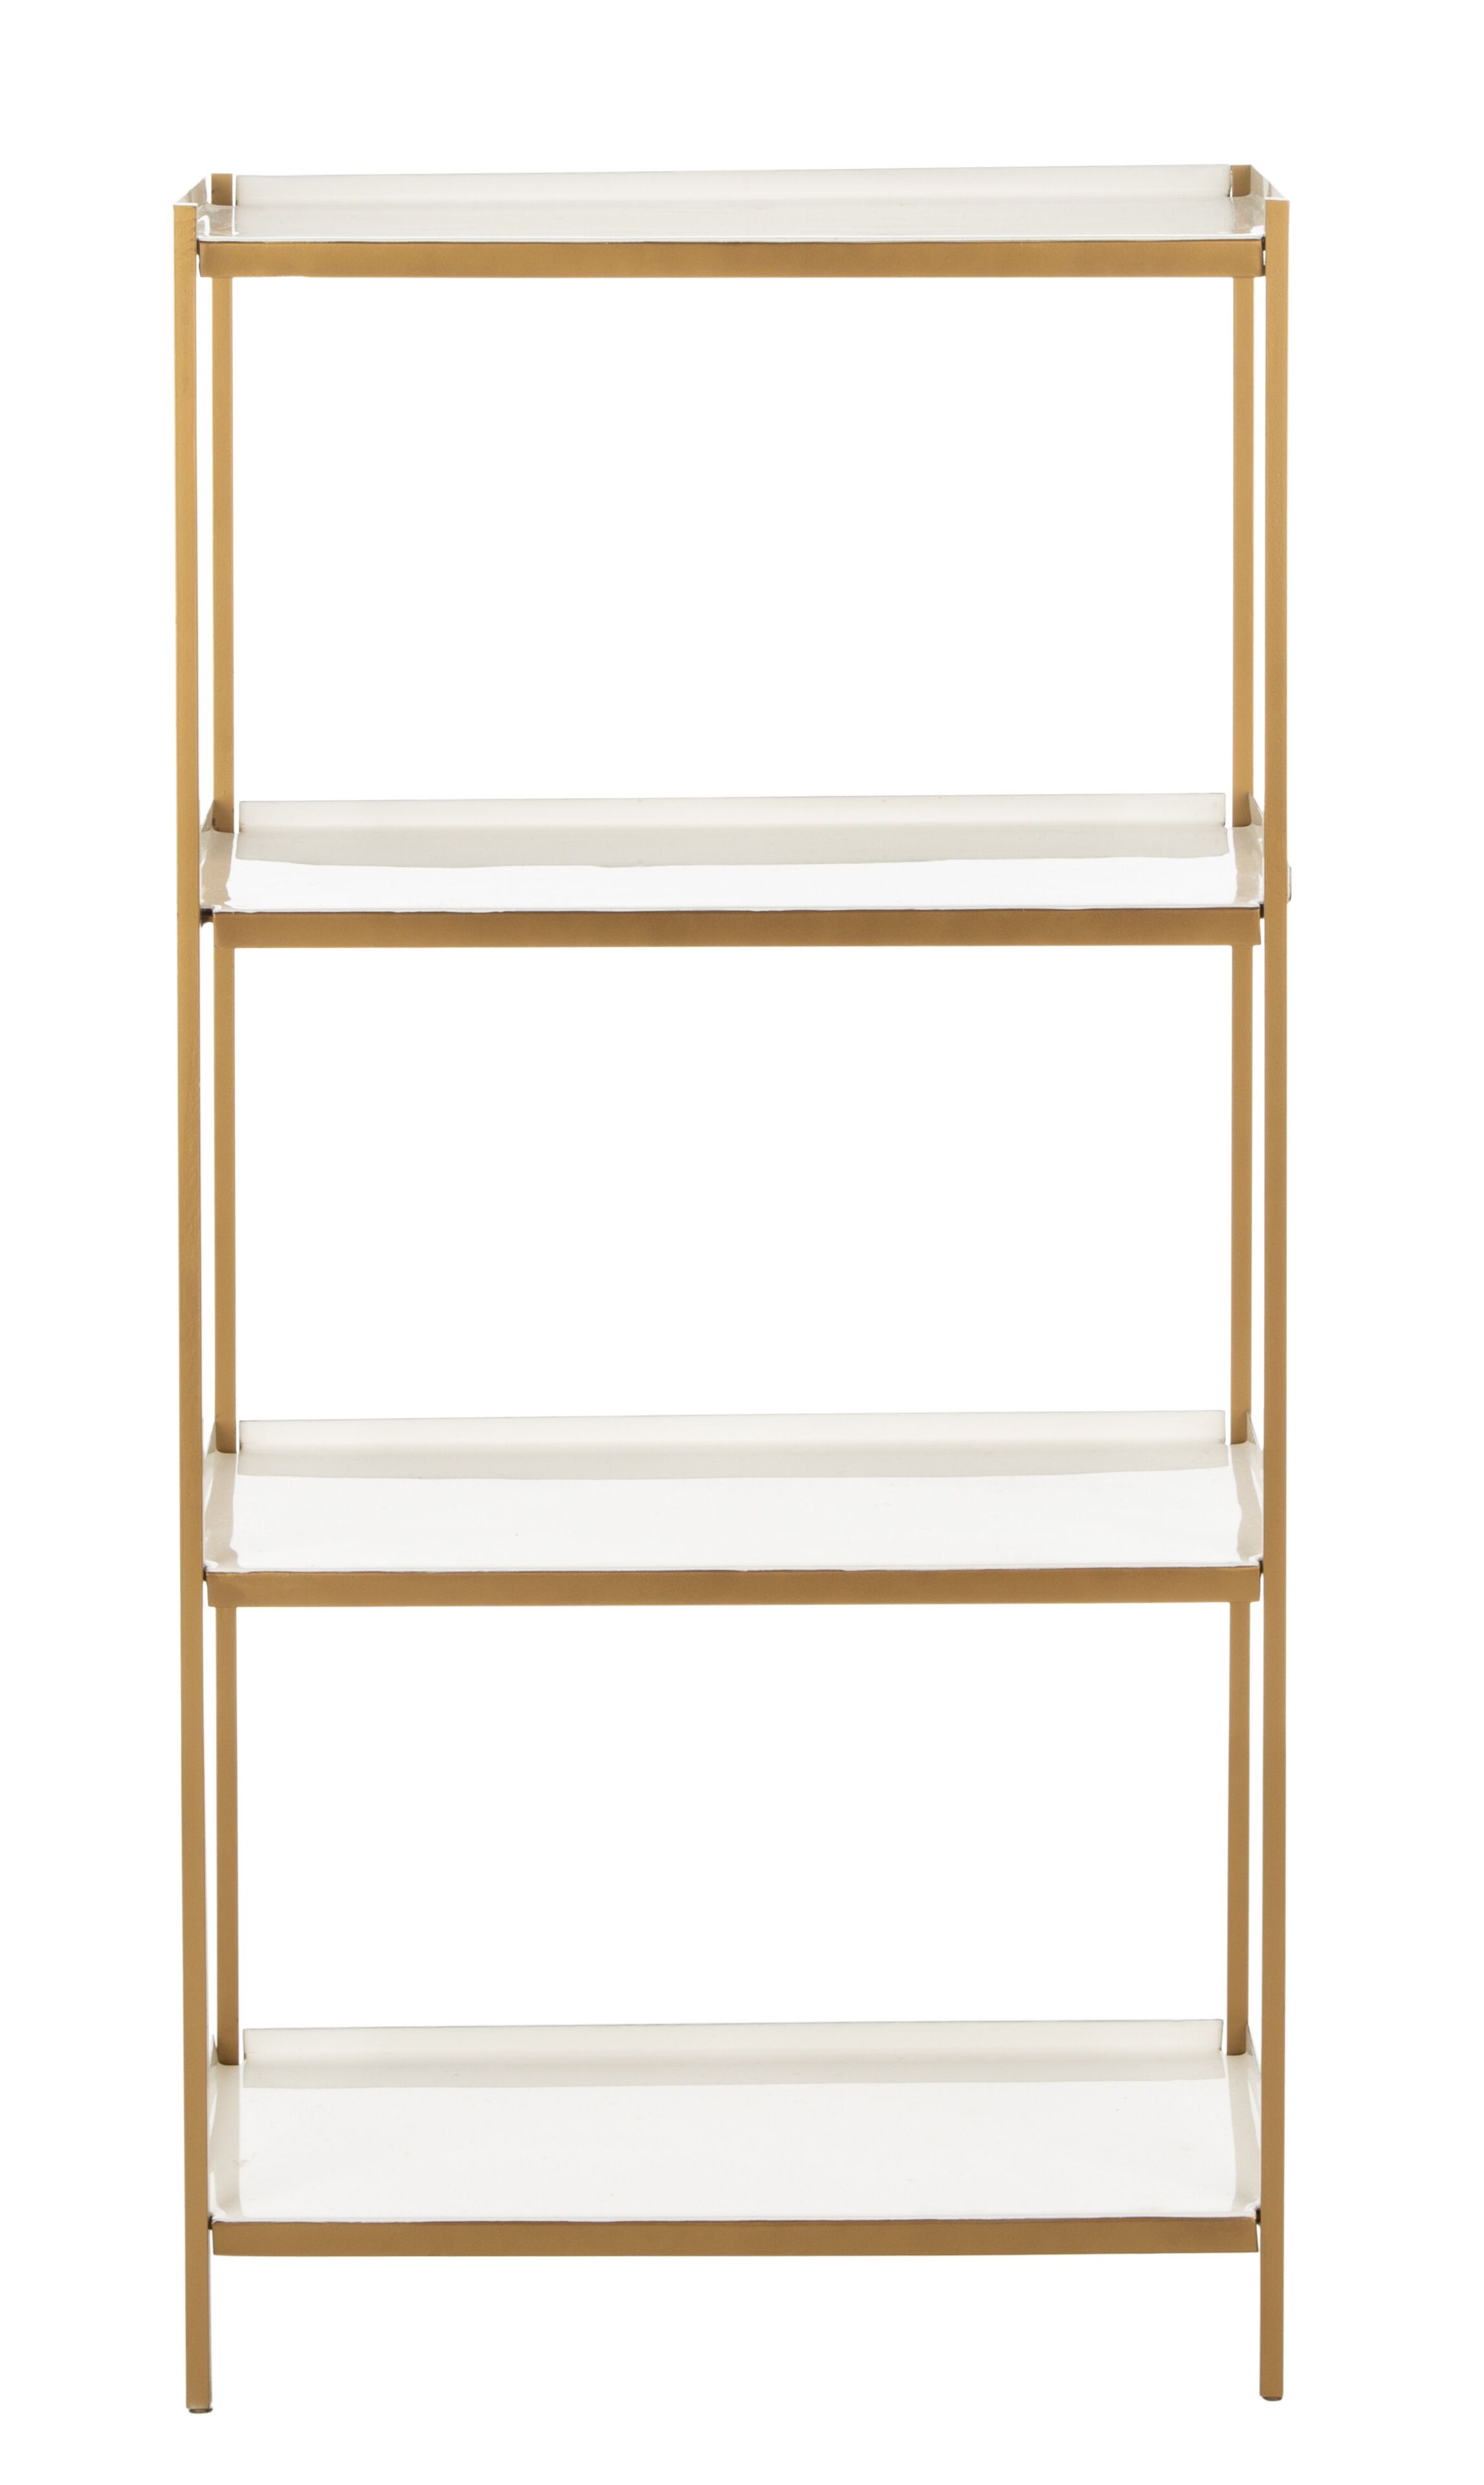 Widely Used Damon Etagere Bookcases With Slaton 4 Tier Etagere Bookcase (View 10 of 20)